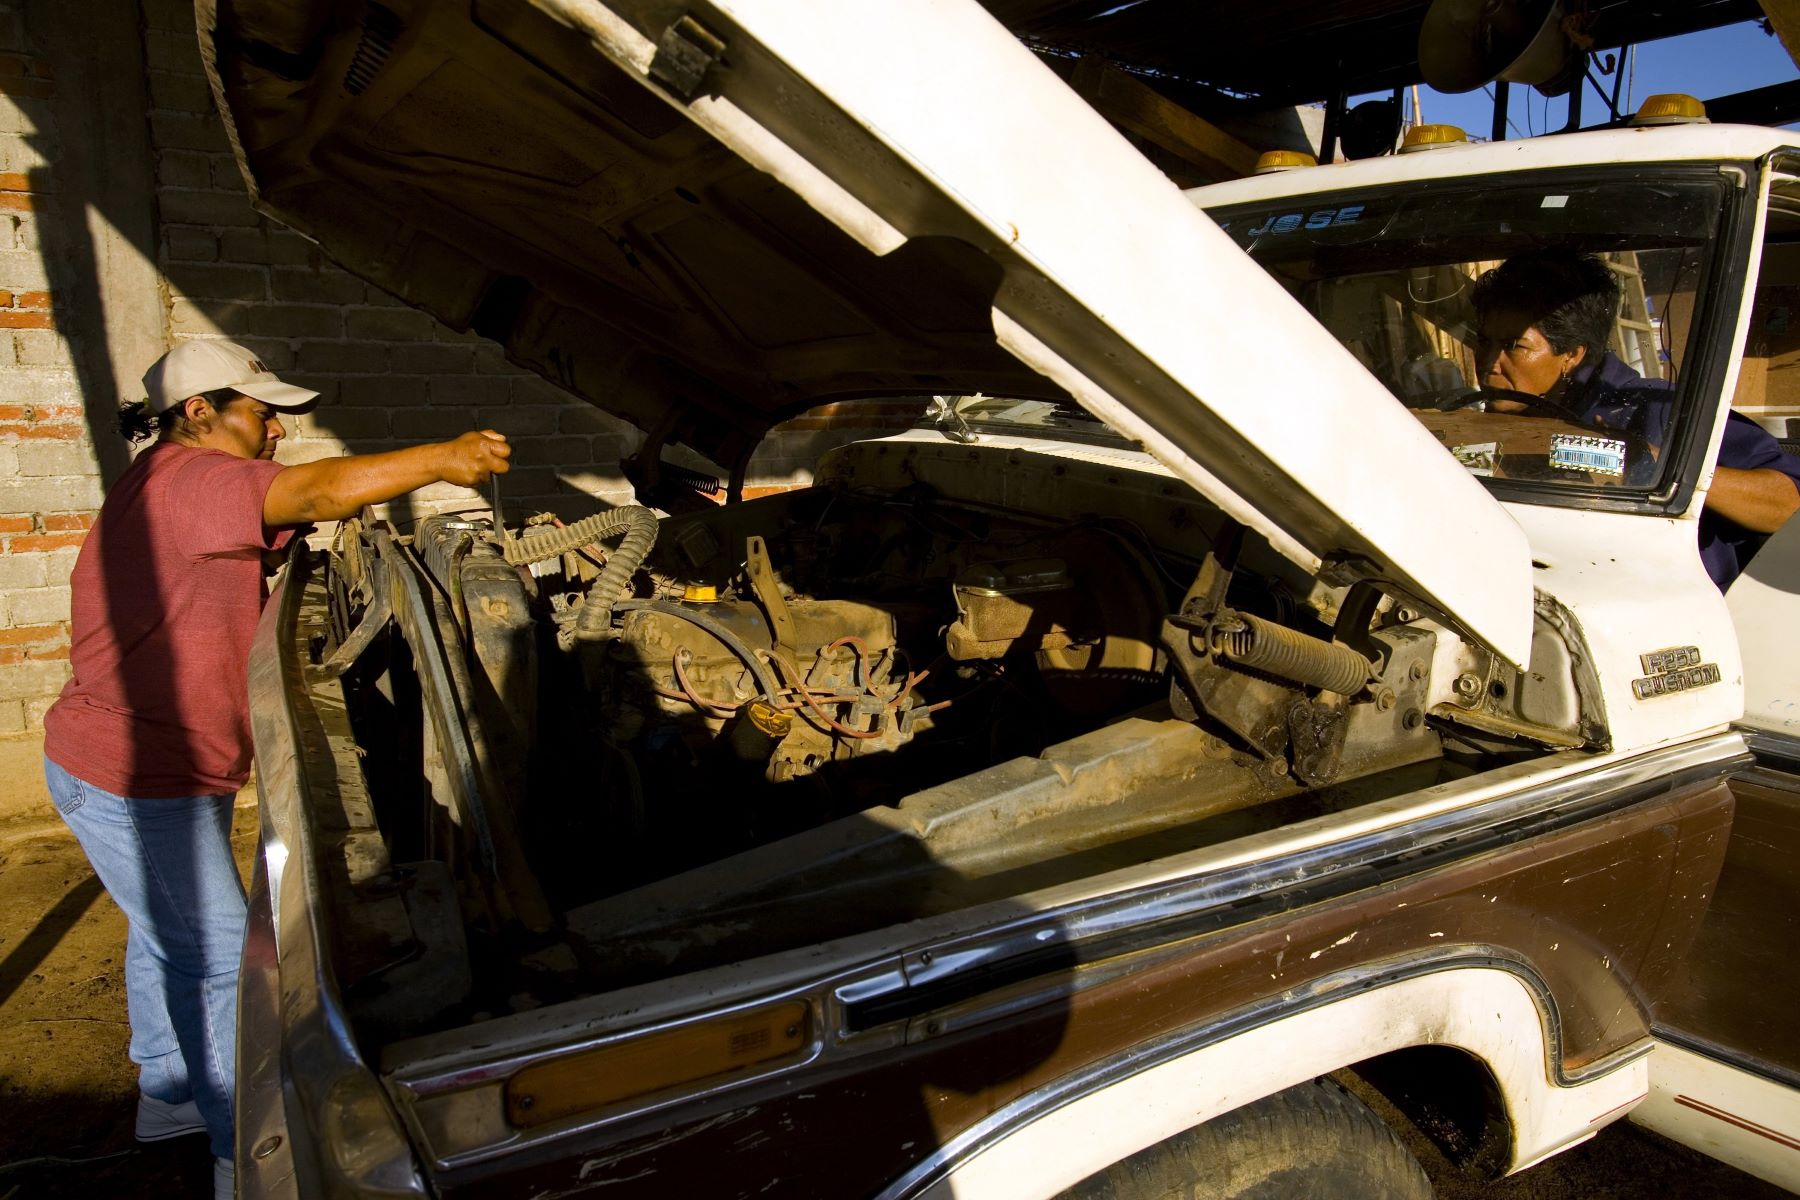 An oil change being performed on a truck in Oaxaca, Mexico